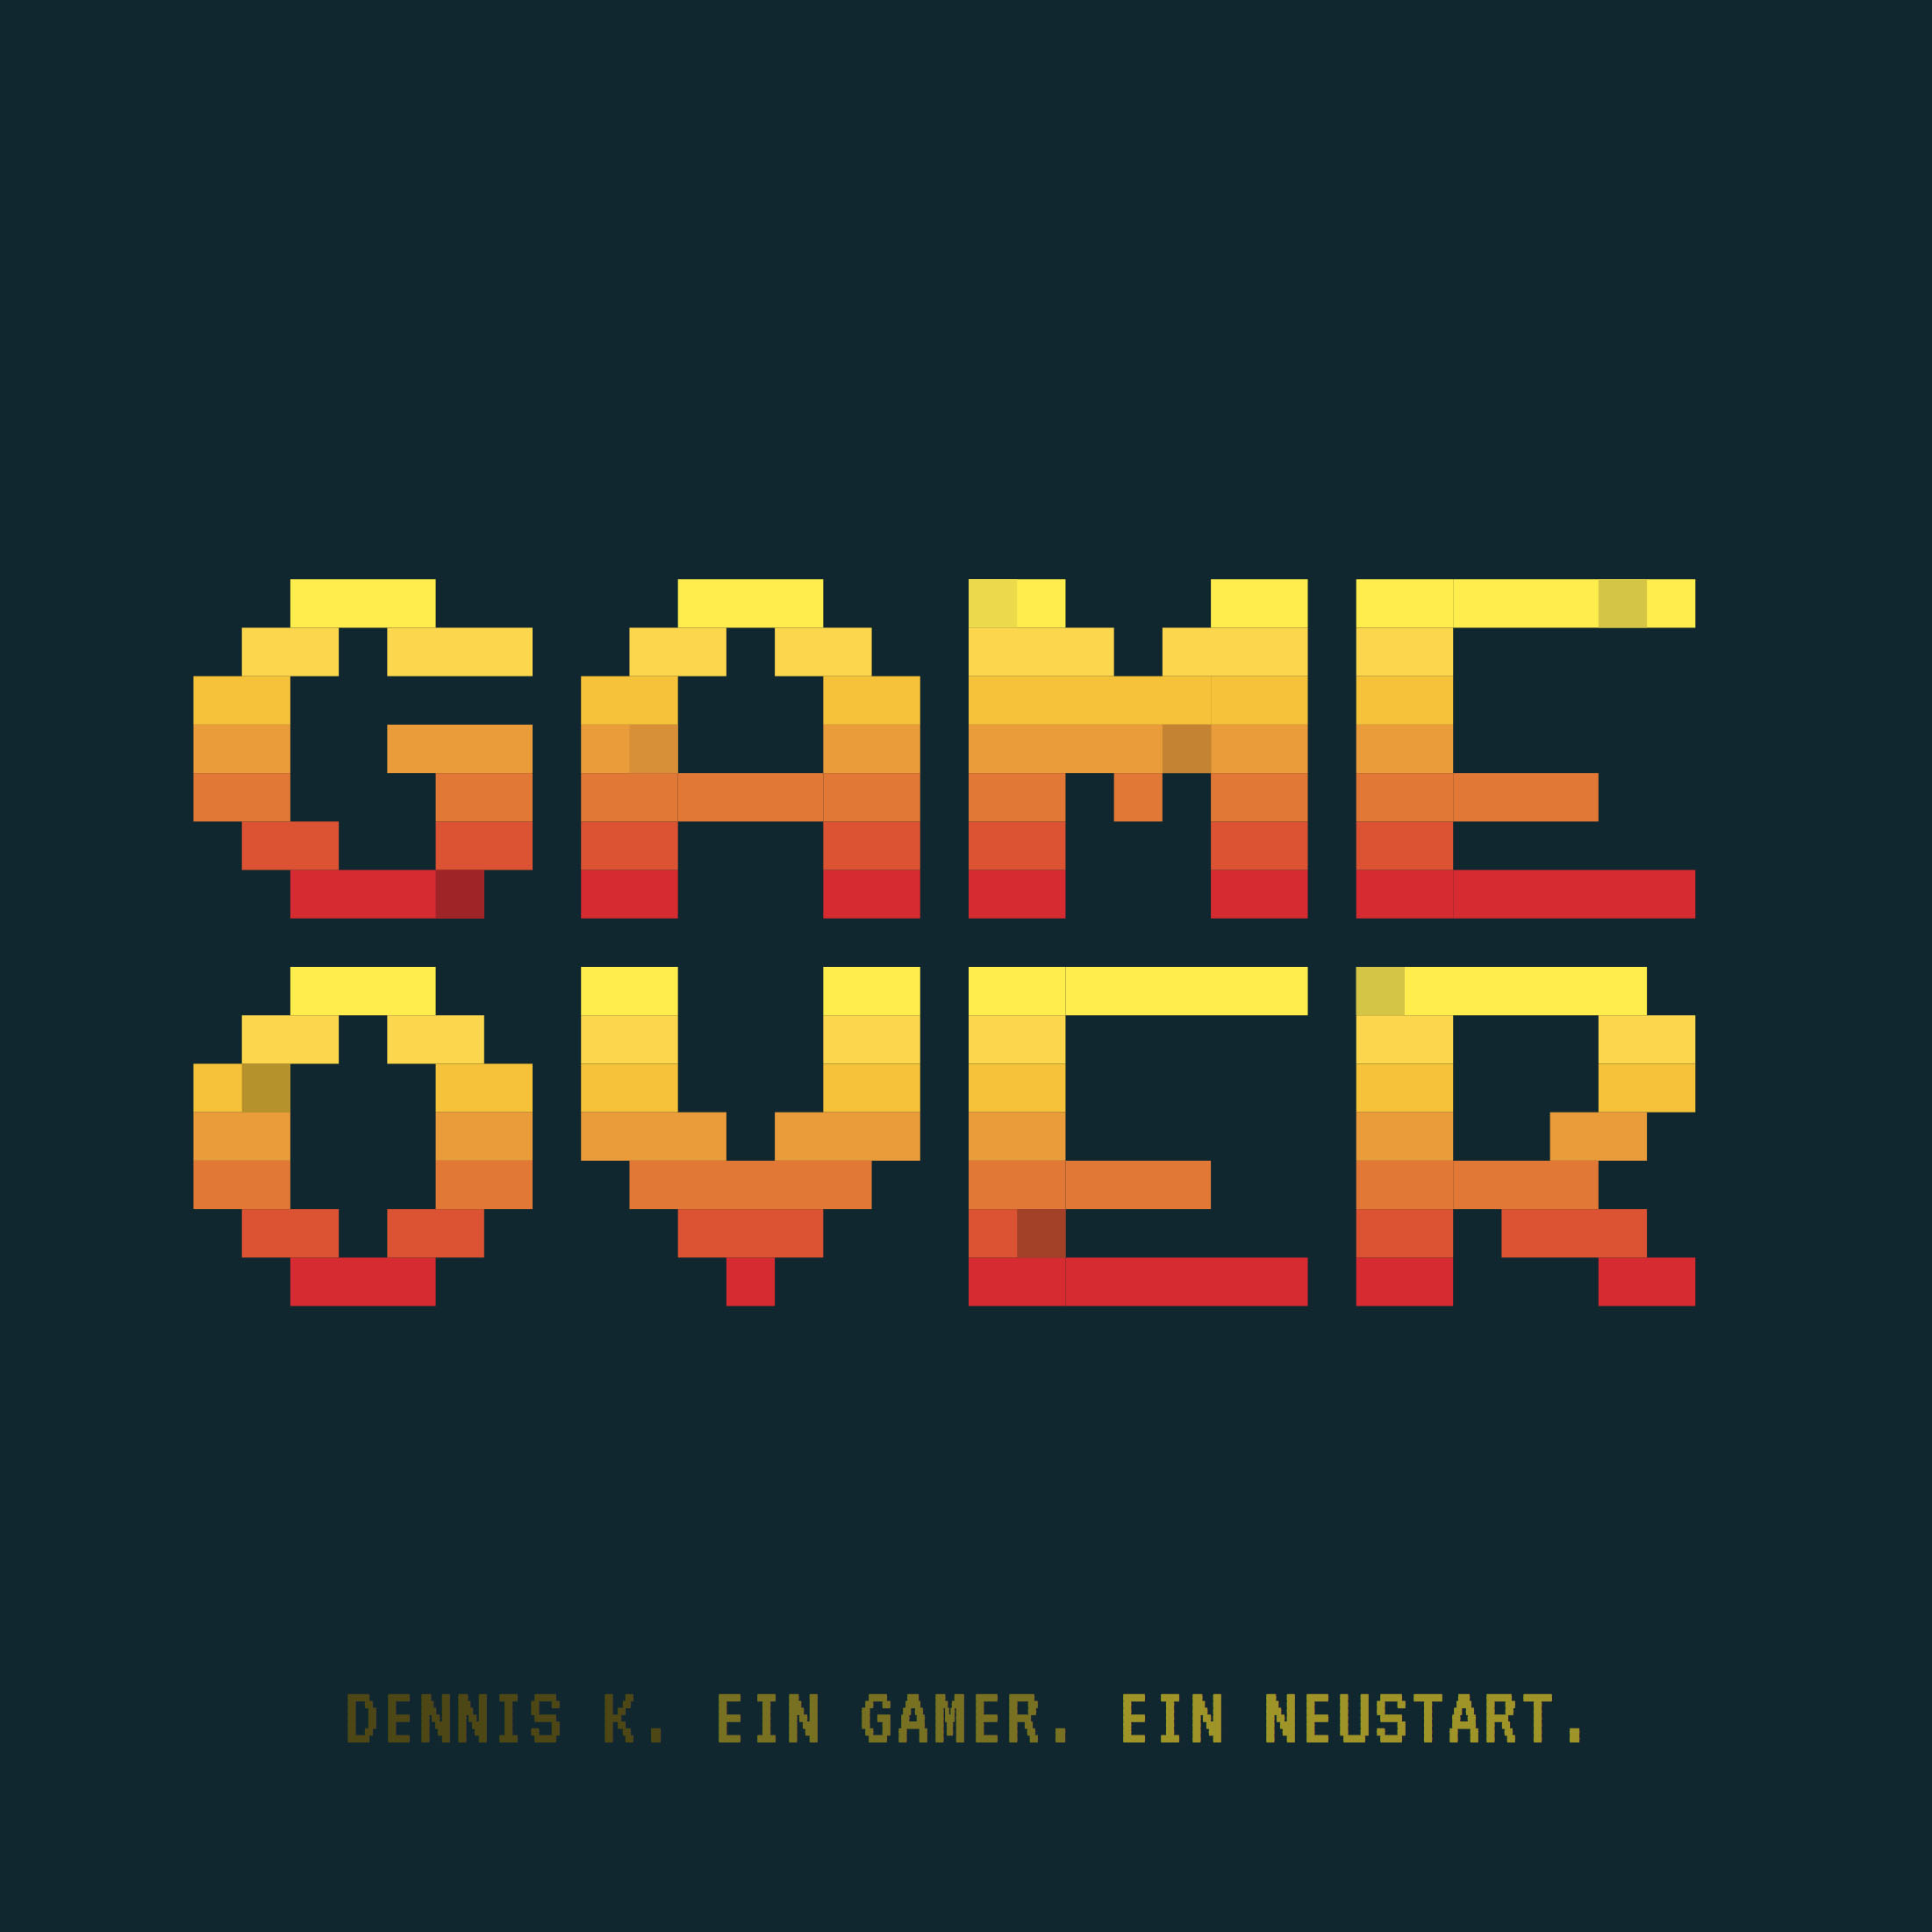 All over a game. Game over Press r to restart. Game over. Pro Gamer тетрадь 48 желтый клетки game over.